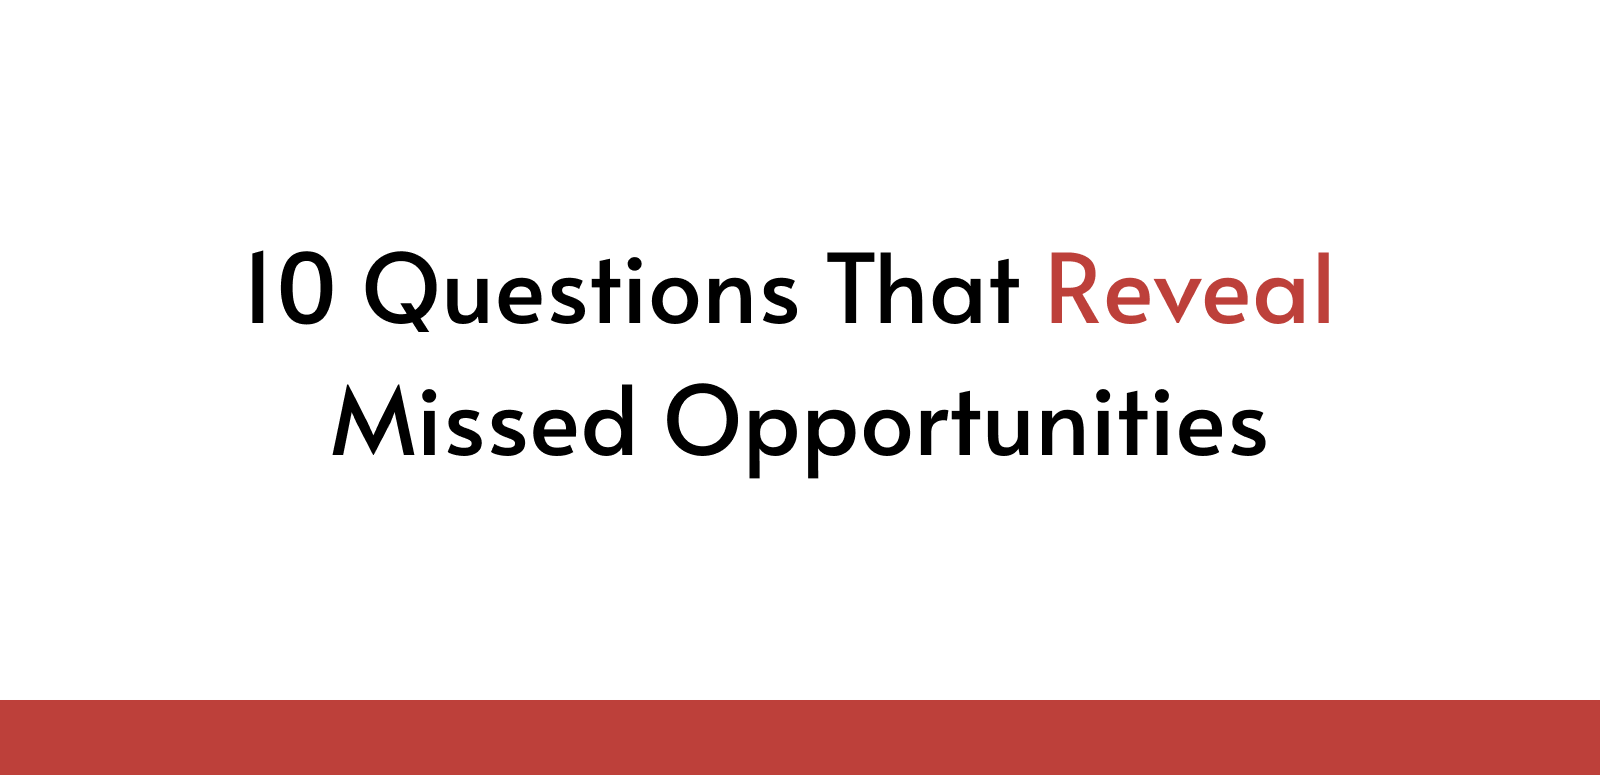 10 Questions That Reveal Missed Opportunities